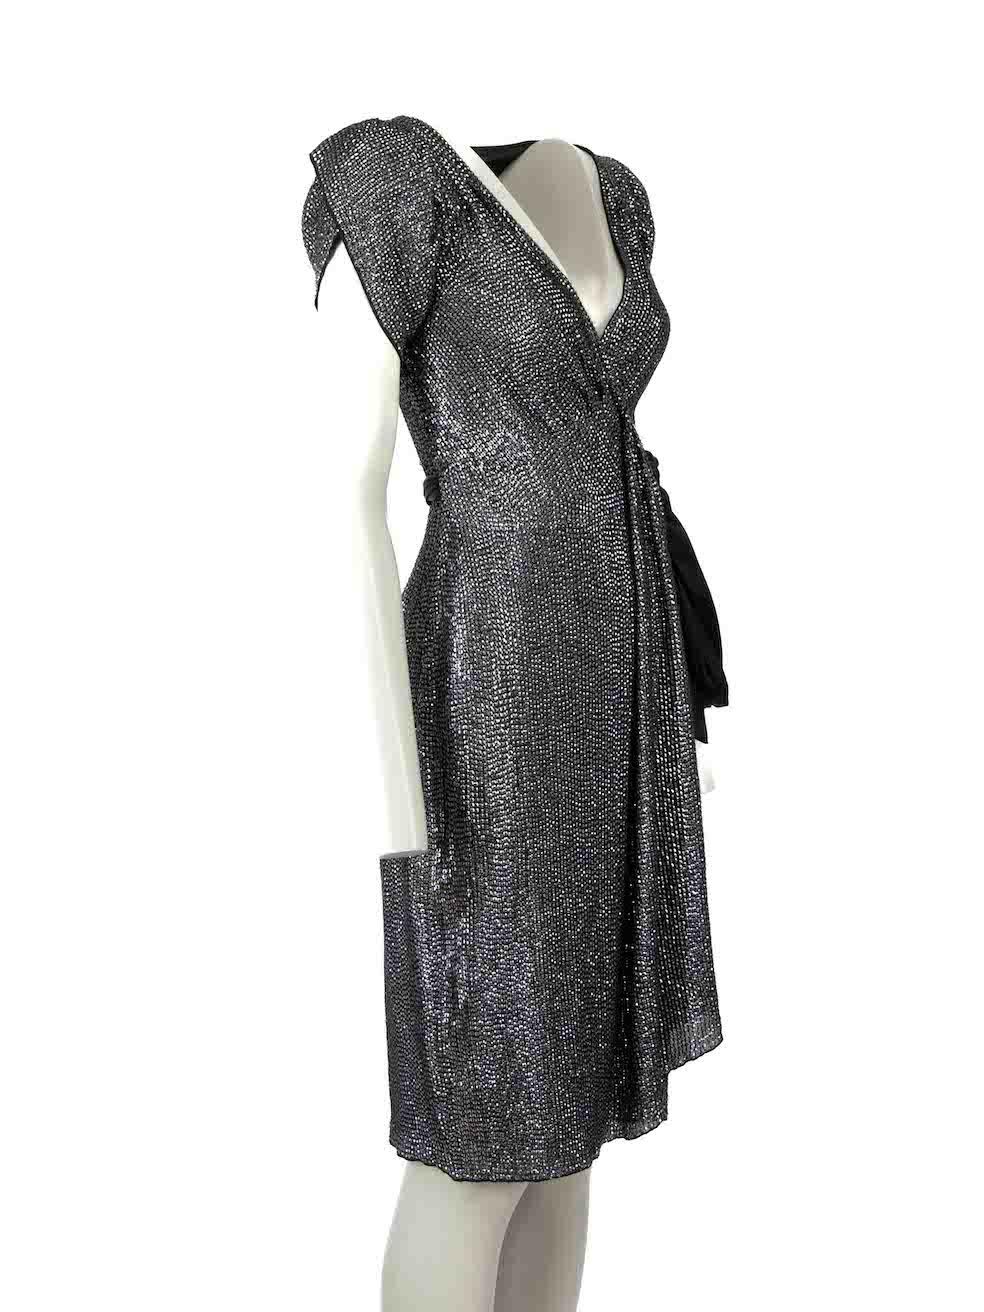 CONDITION is Very good. Hardly any visible wear to dress is evident on this used Diane Von Furstenberg designer resale item.
 
 Details
 Black
 Silk
 Wrap dress
 Short sleeves
 V-neck
 Sequin embellished
 Midi
 
 Made in China
 
 Composition
 100%